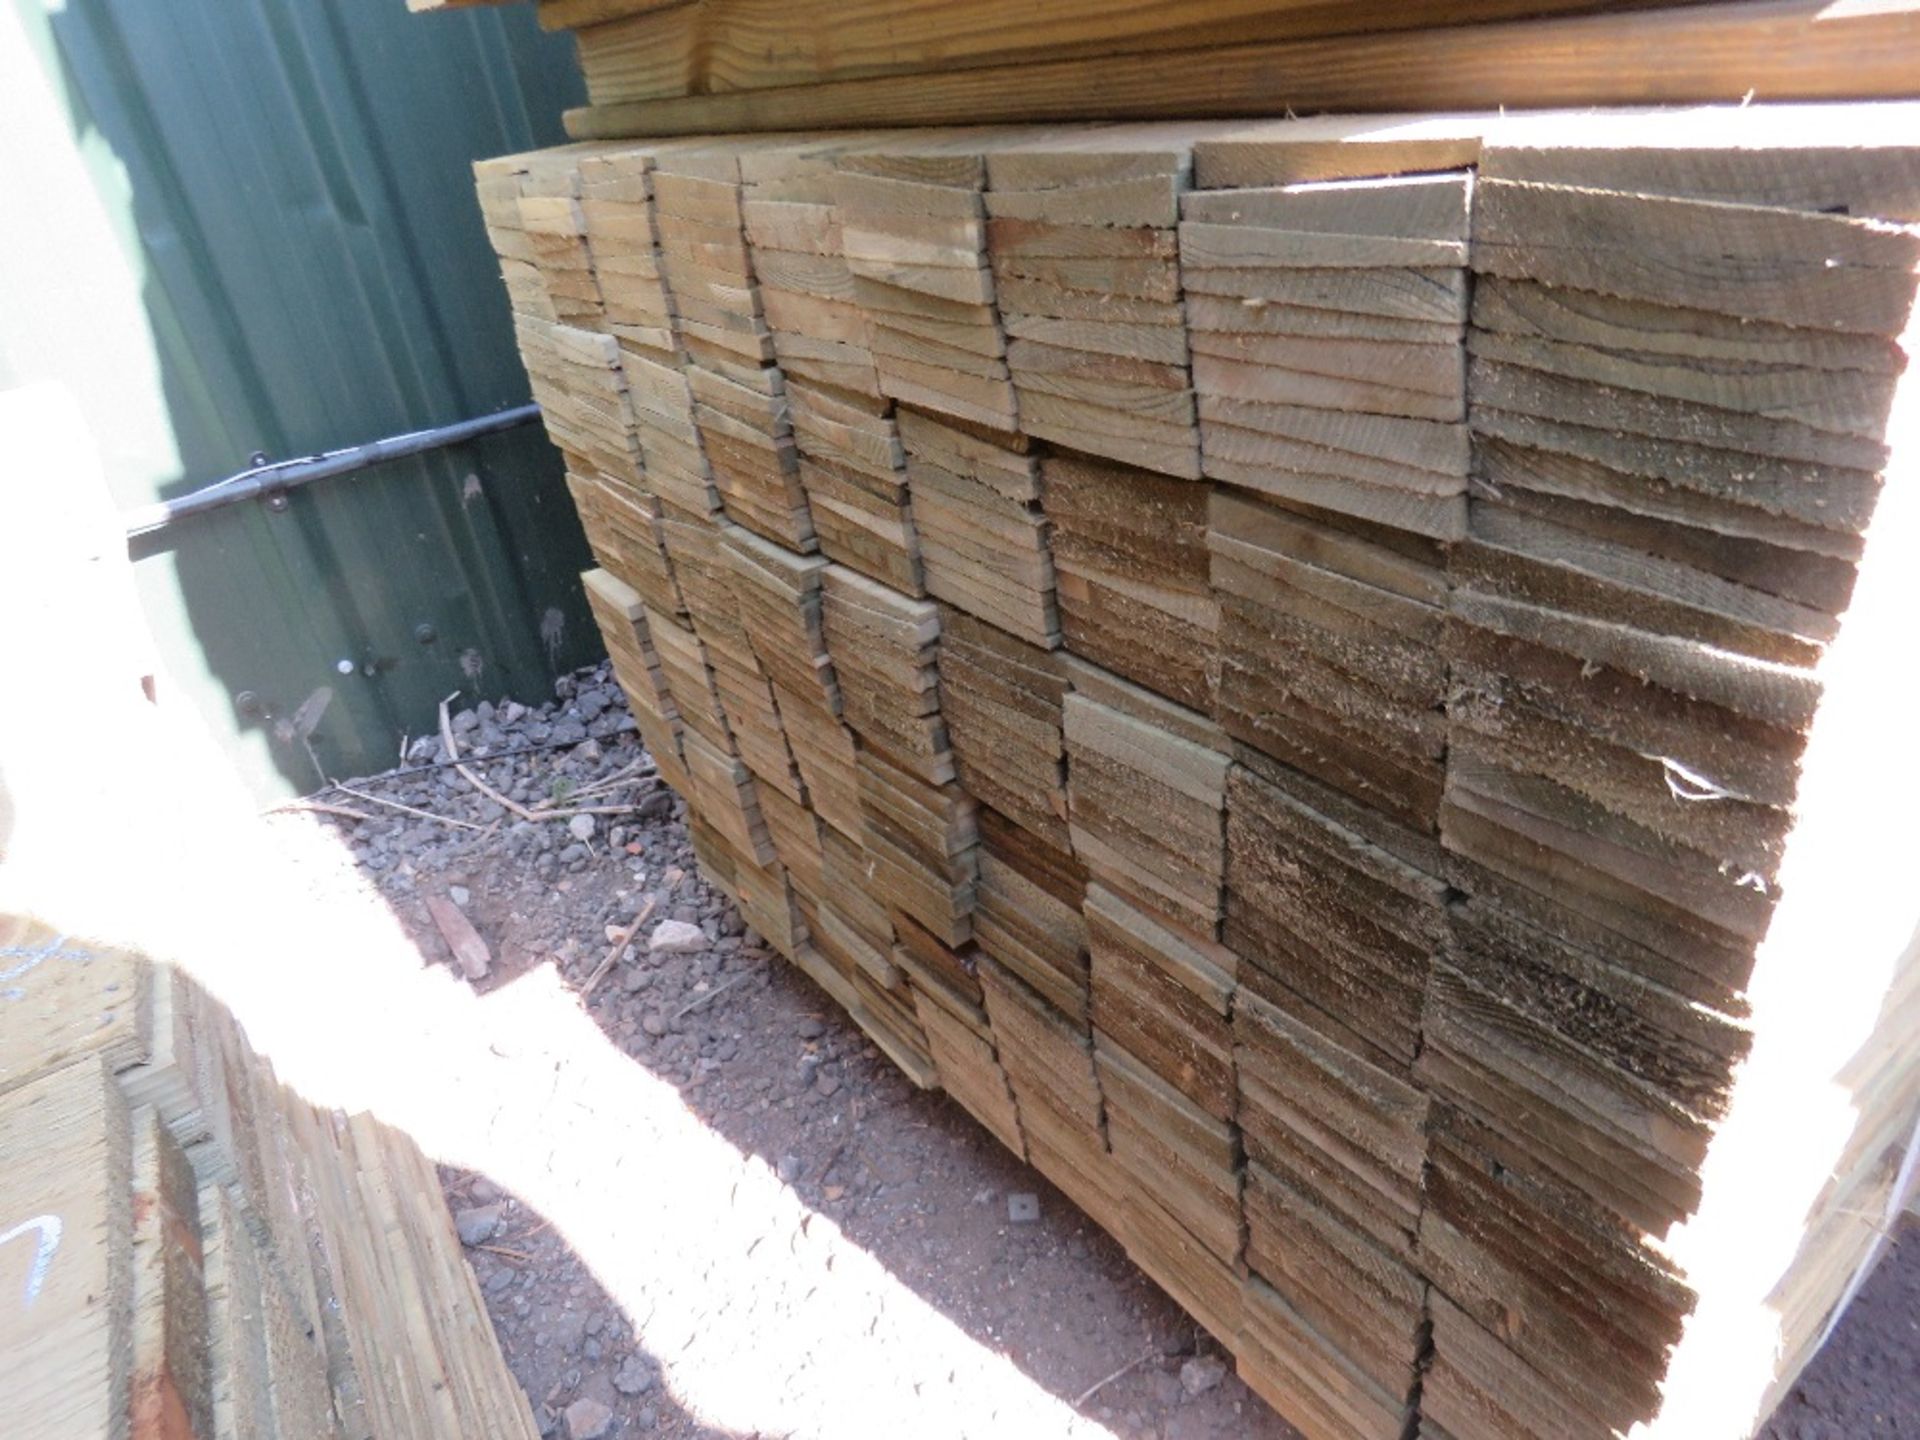 PACK OF PRESSURE TREATED FEATHER EDGE TIMBER FENCE CLADDING BOARDS, 1.8M LENGTH X 10.5CM WIDTH APPRO - Image 2 of 2